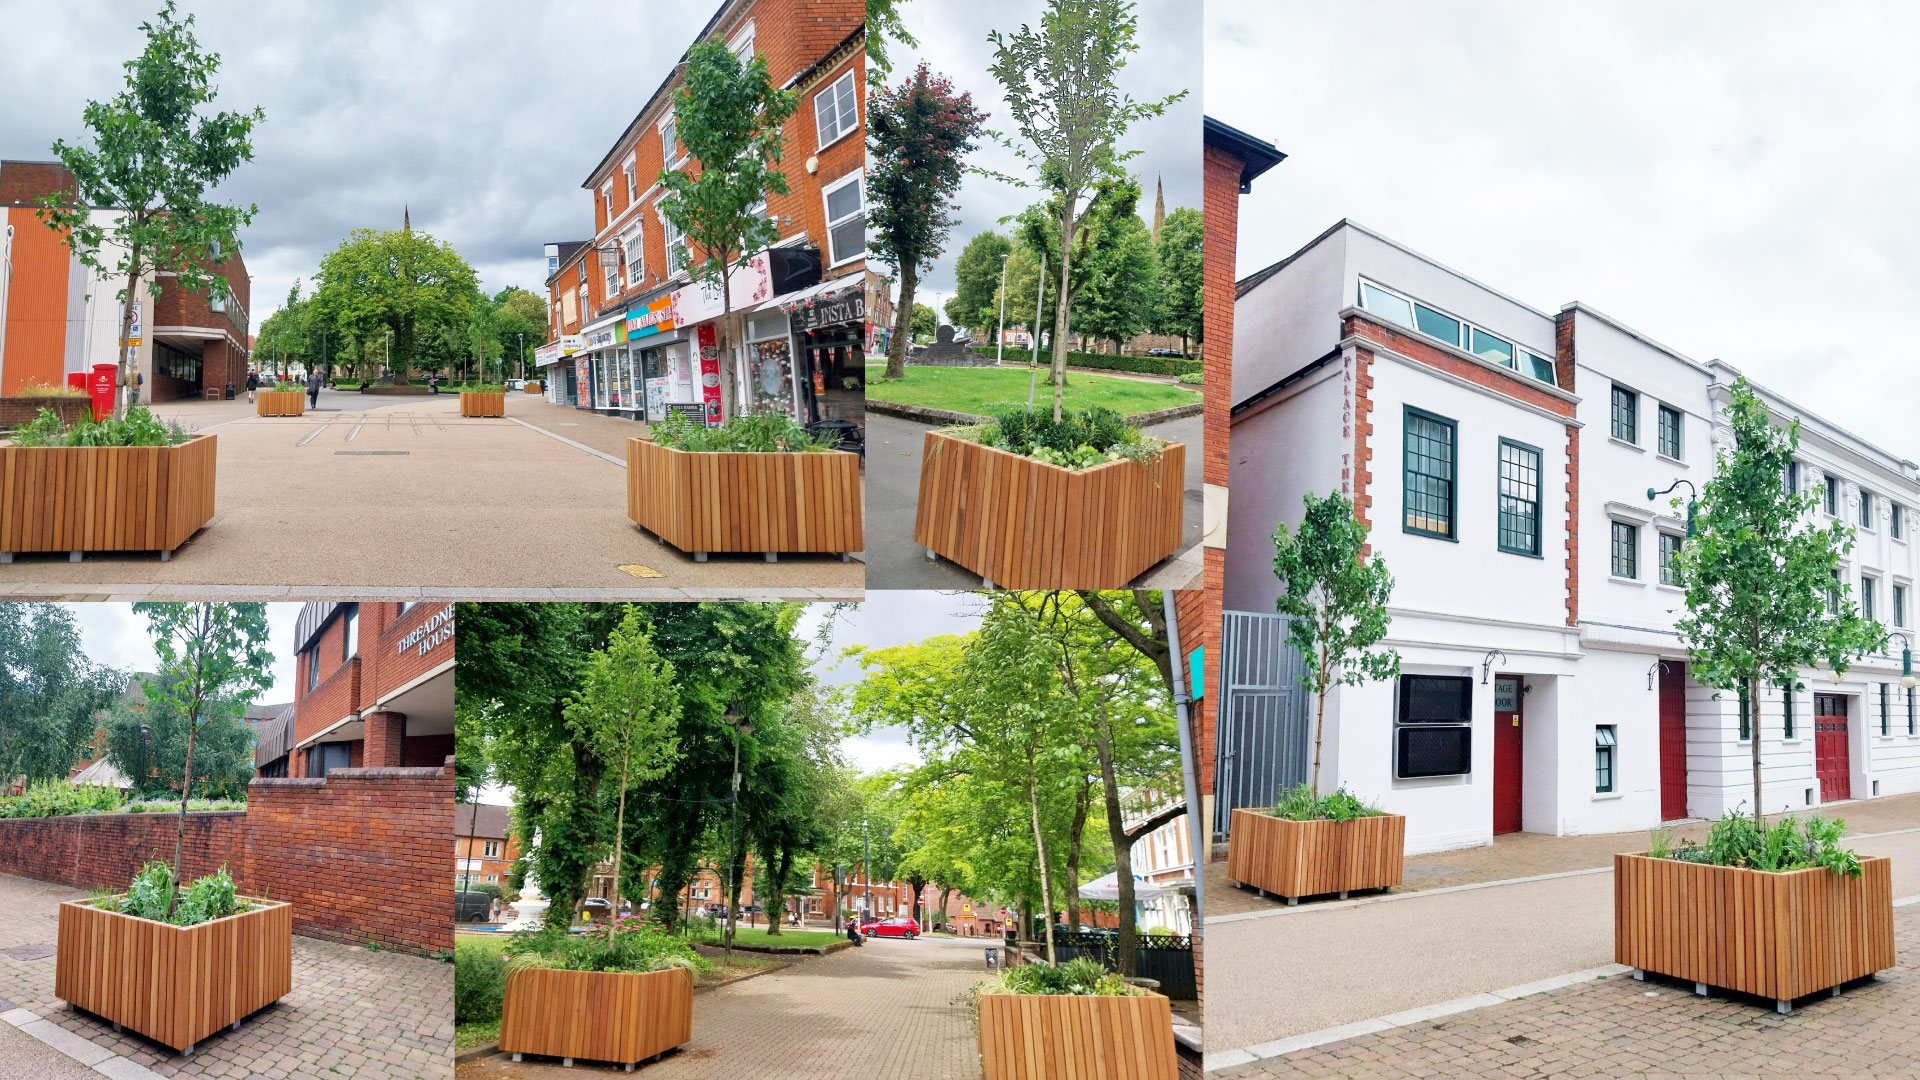 A collage of images of Redditch showing the new trees